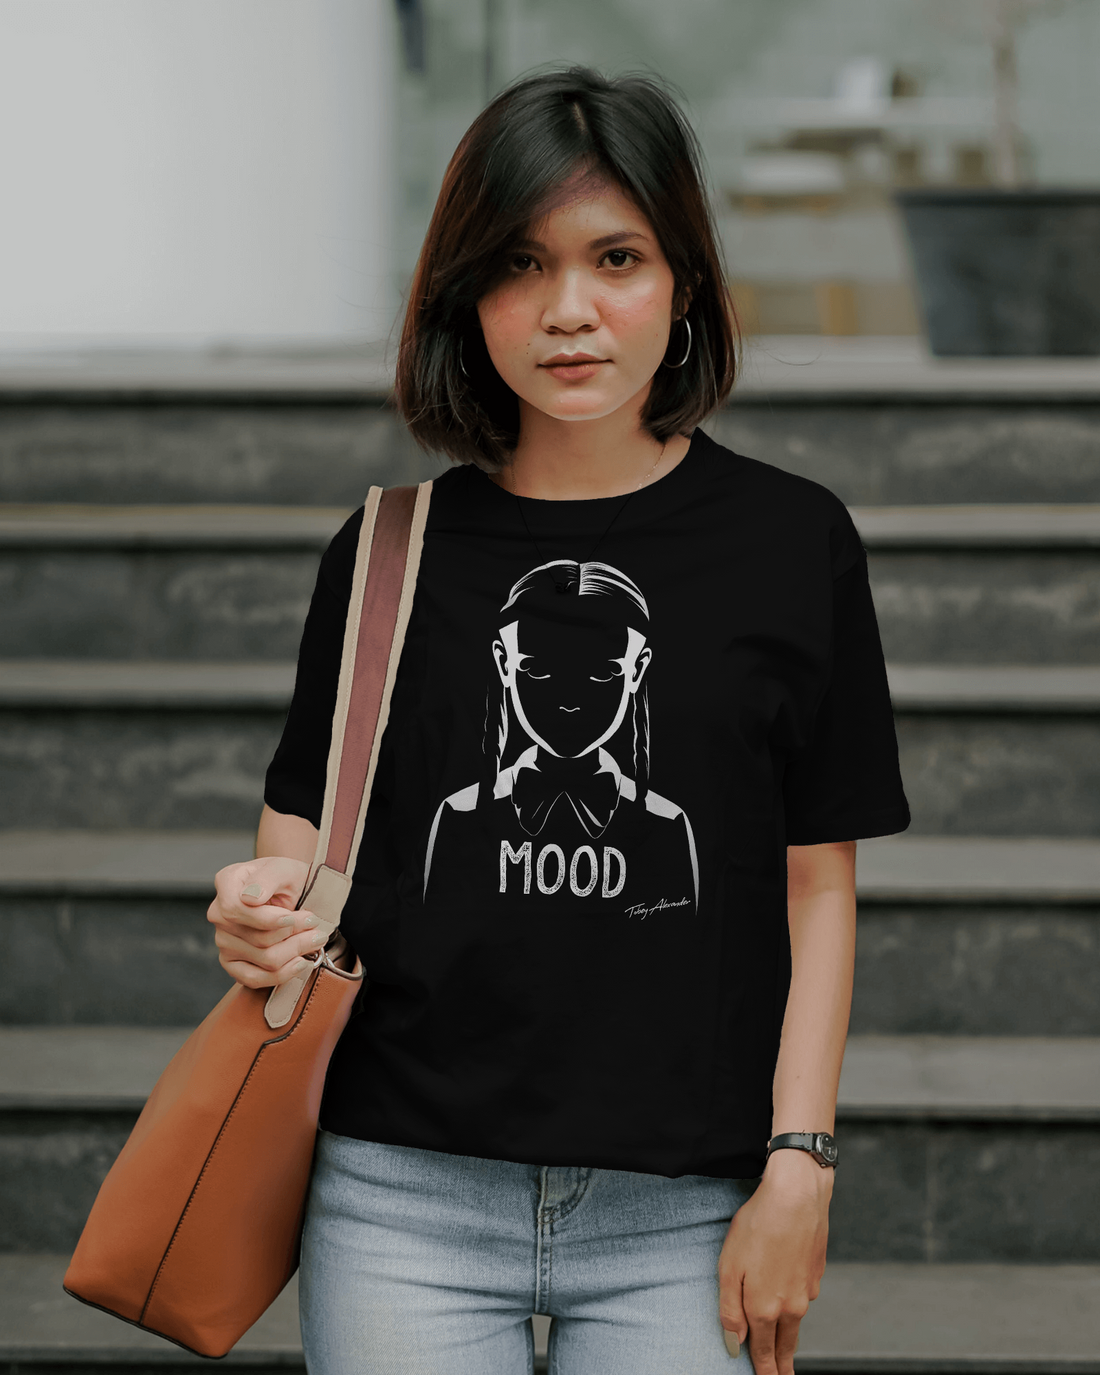 Organic and Unisex: What You Need To Know About the MOOD T-shirt